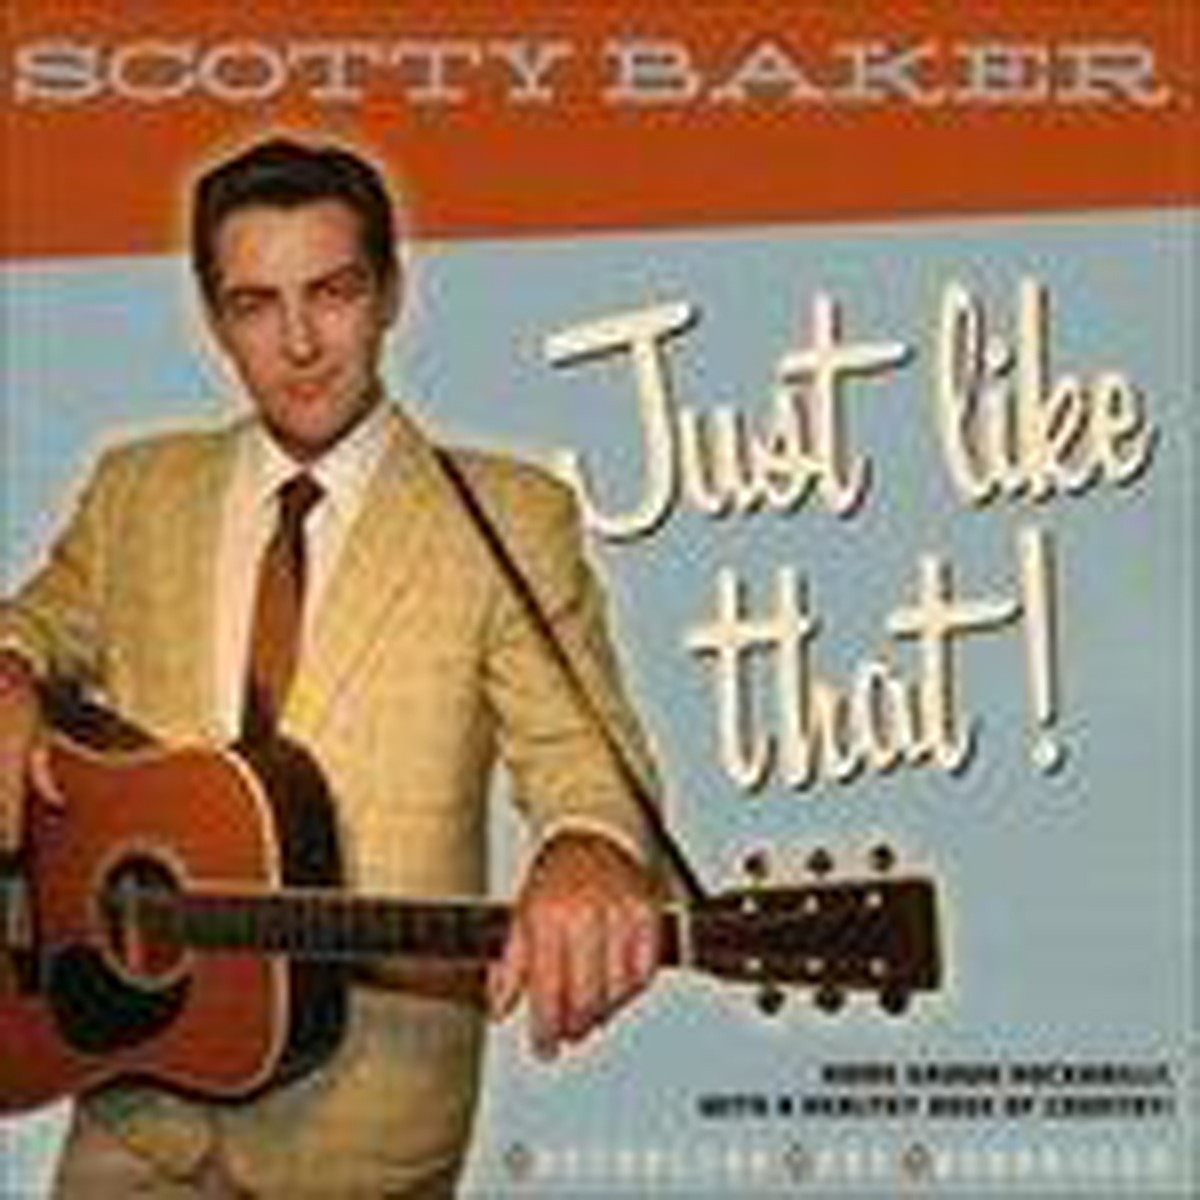 Scotty Baker - Just Like That!